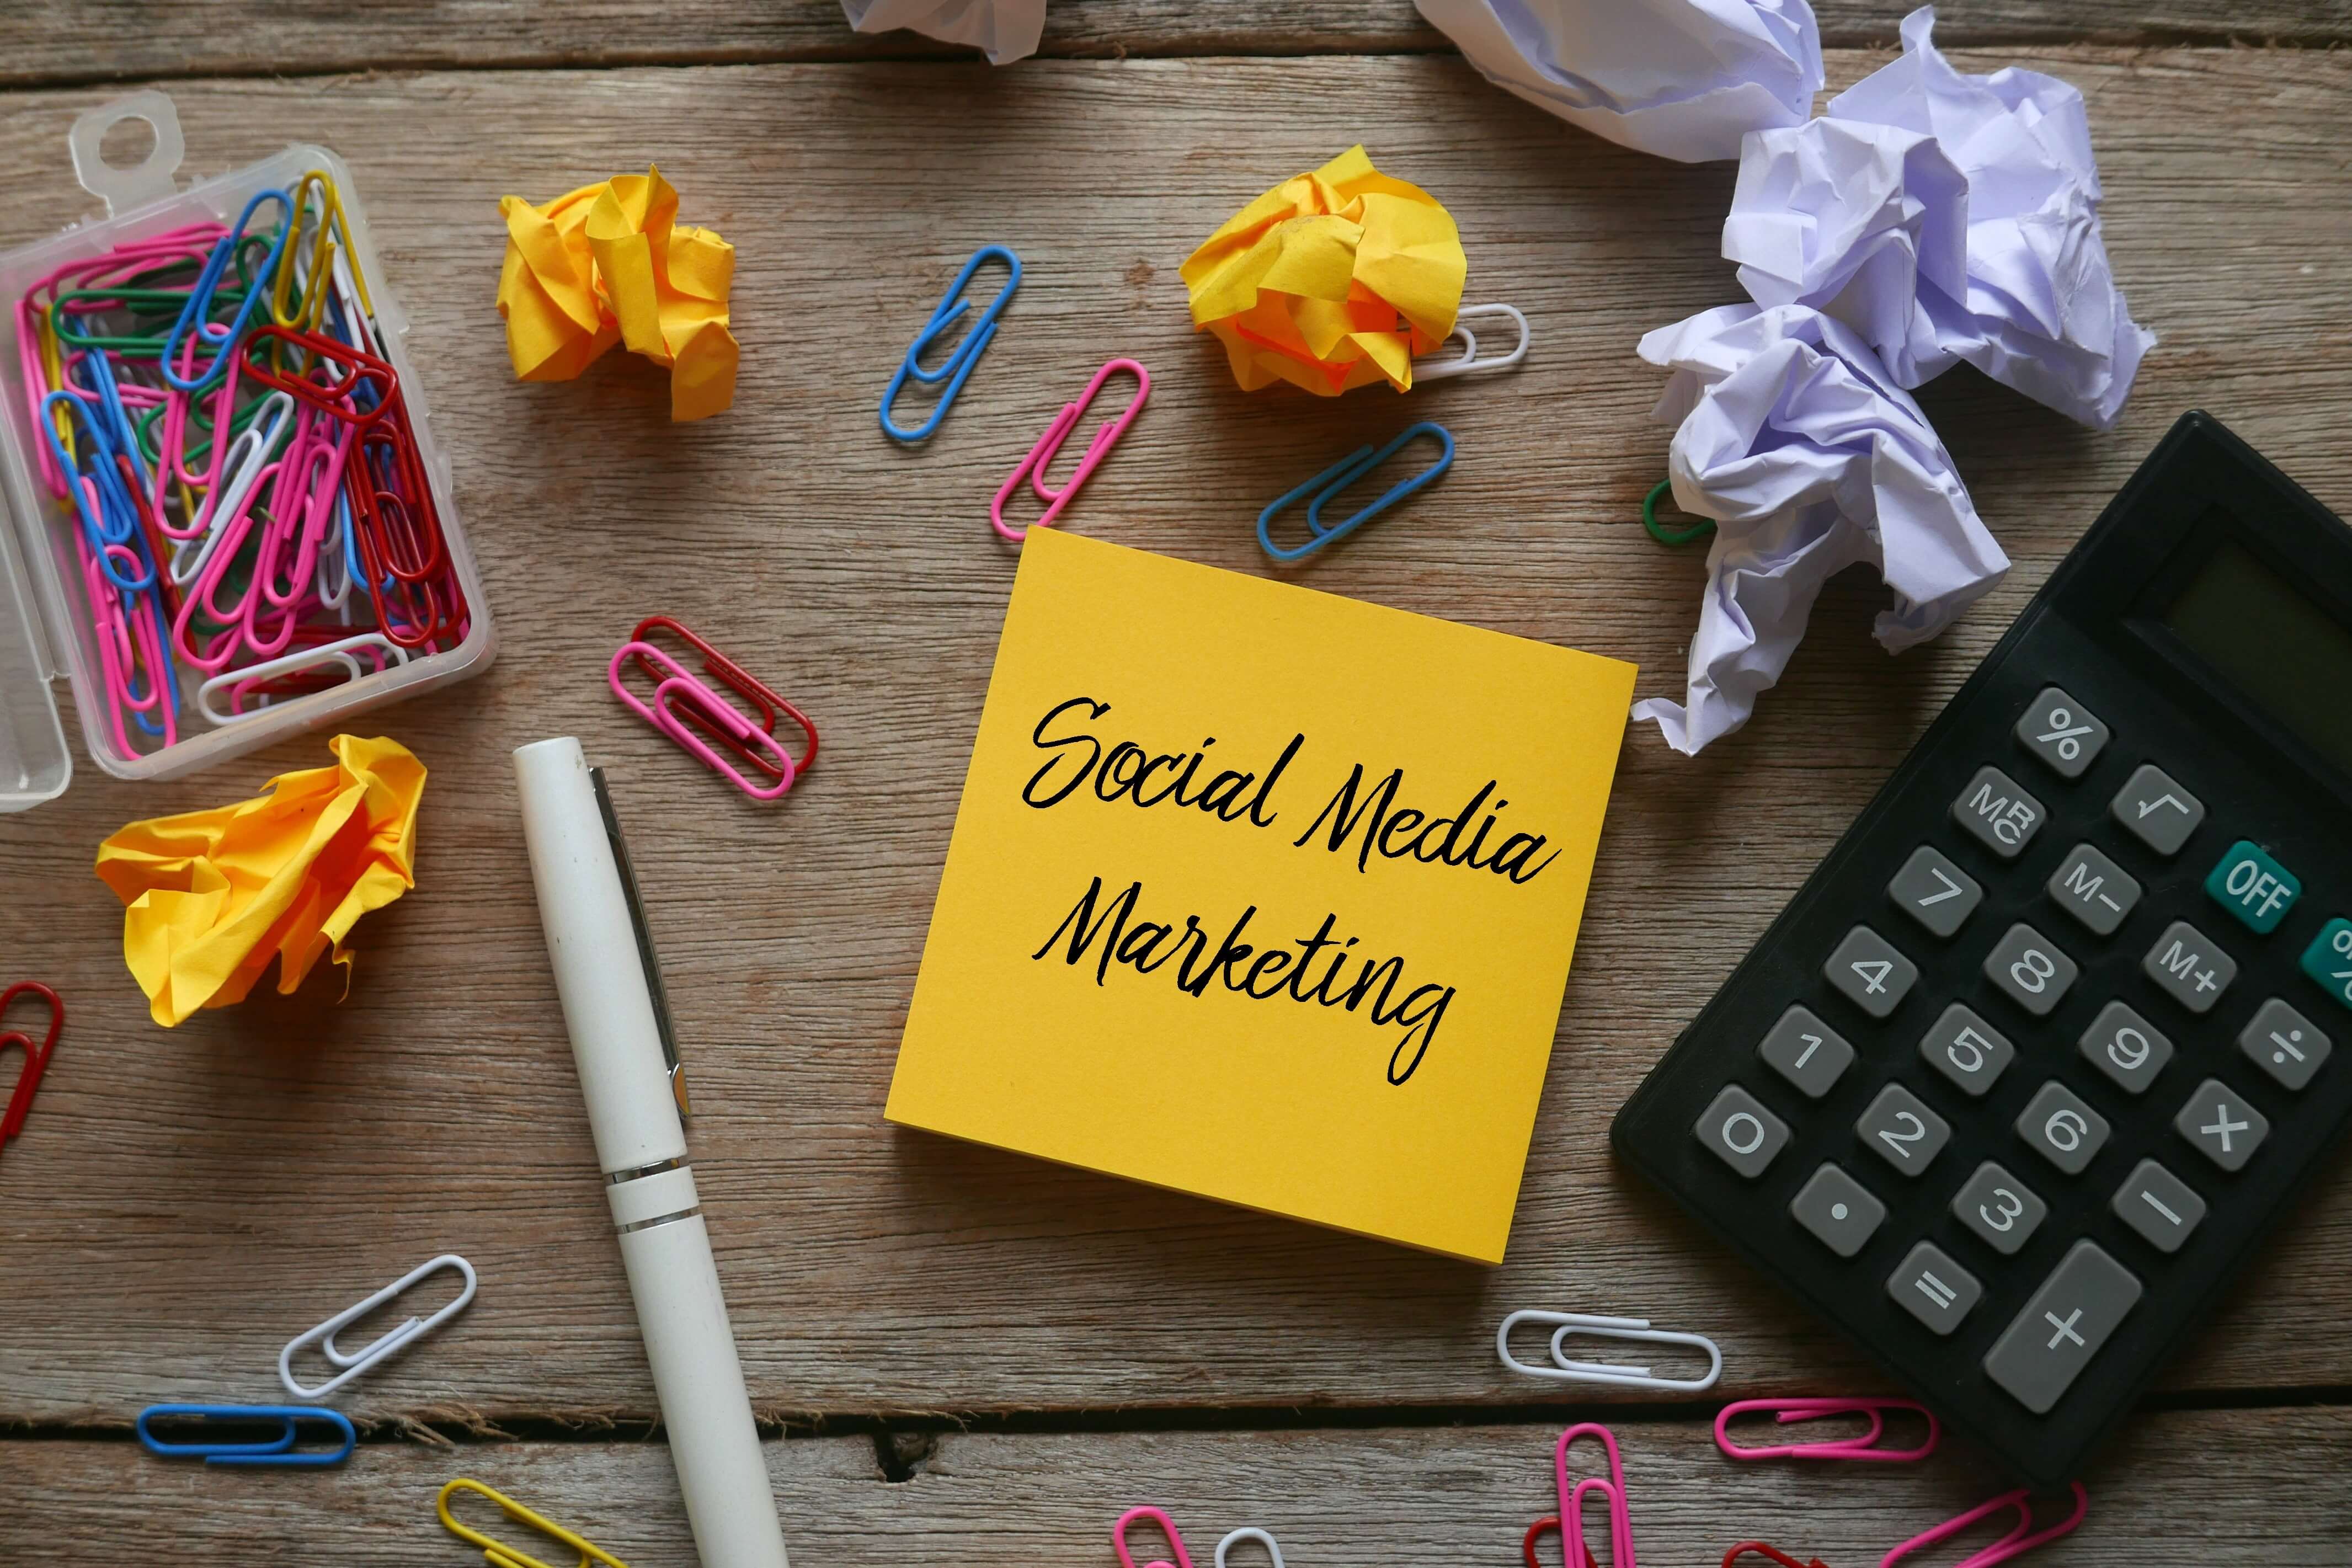 In 9 Simple Steps Create a Social Media Marketing Strategy